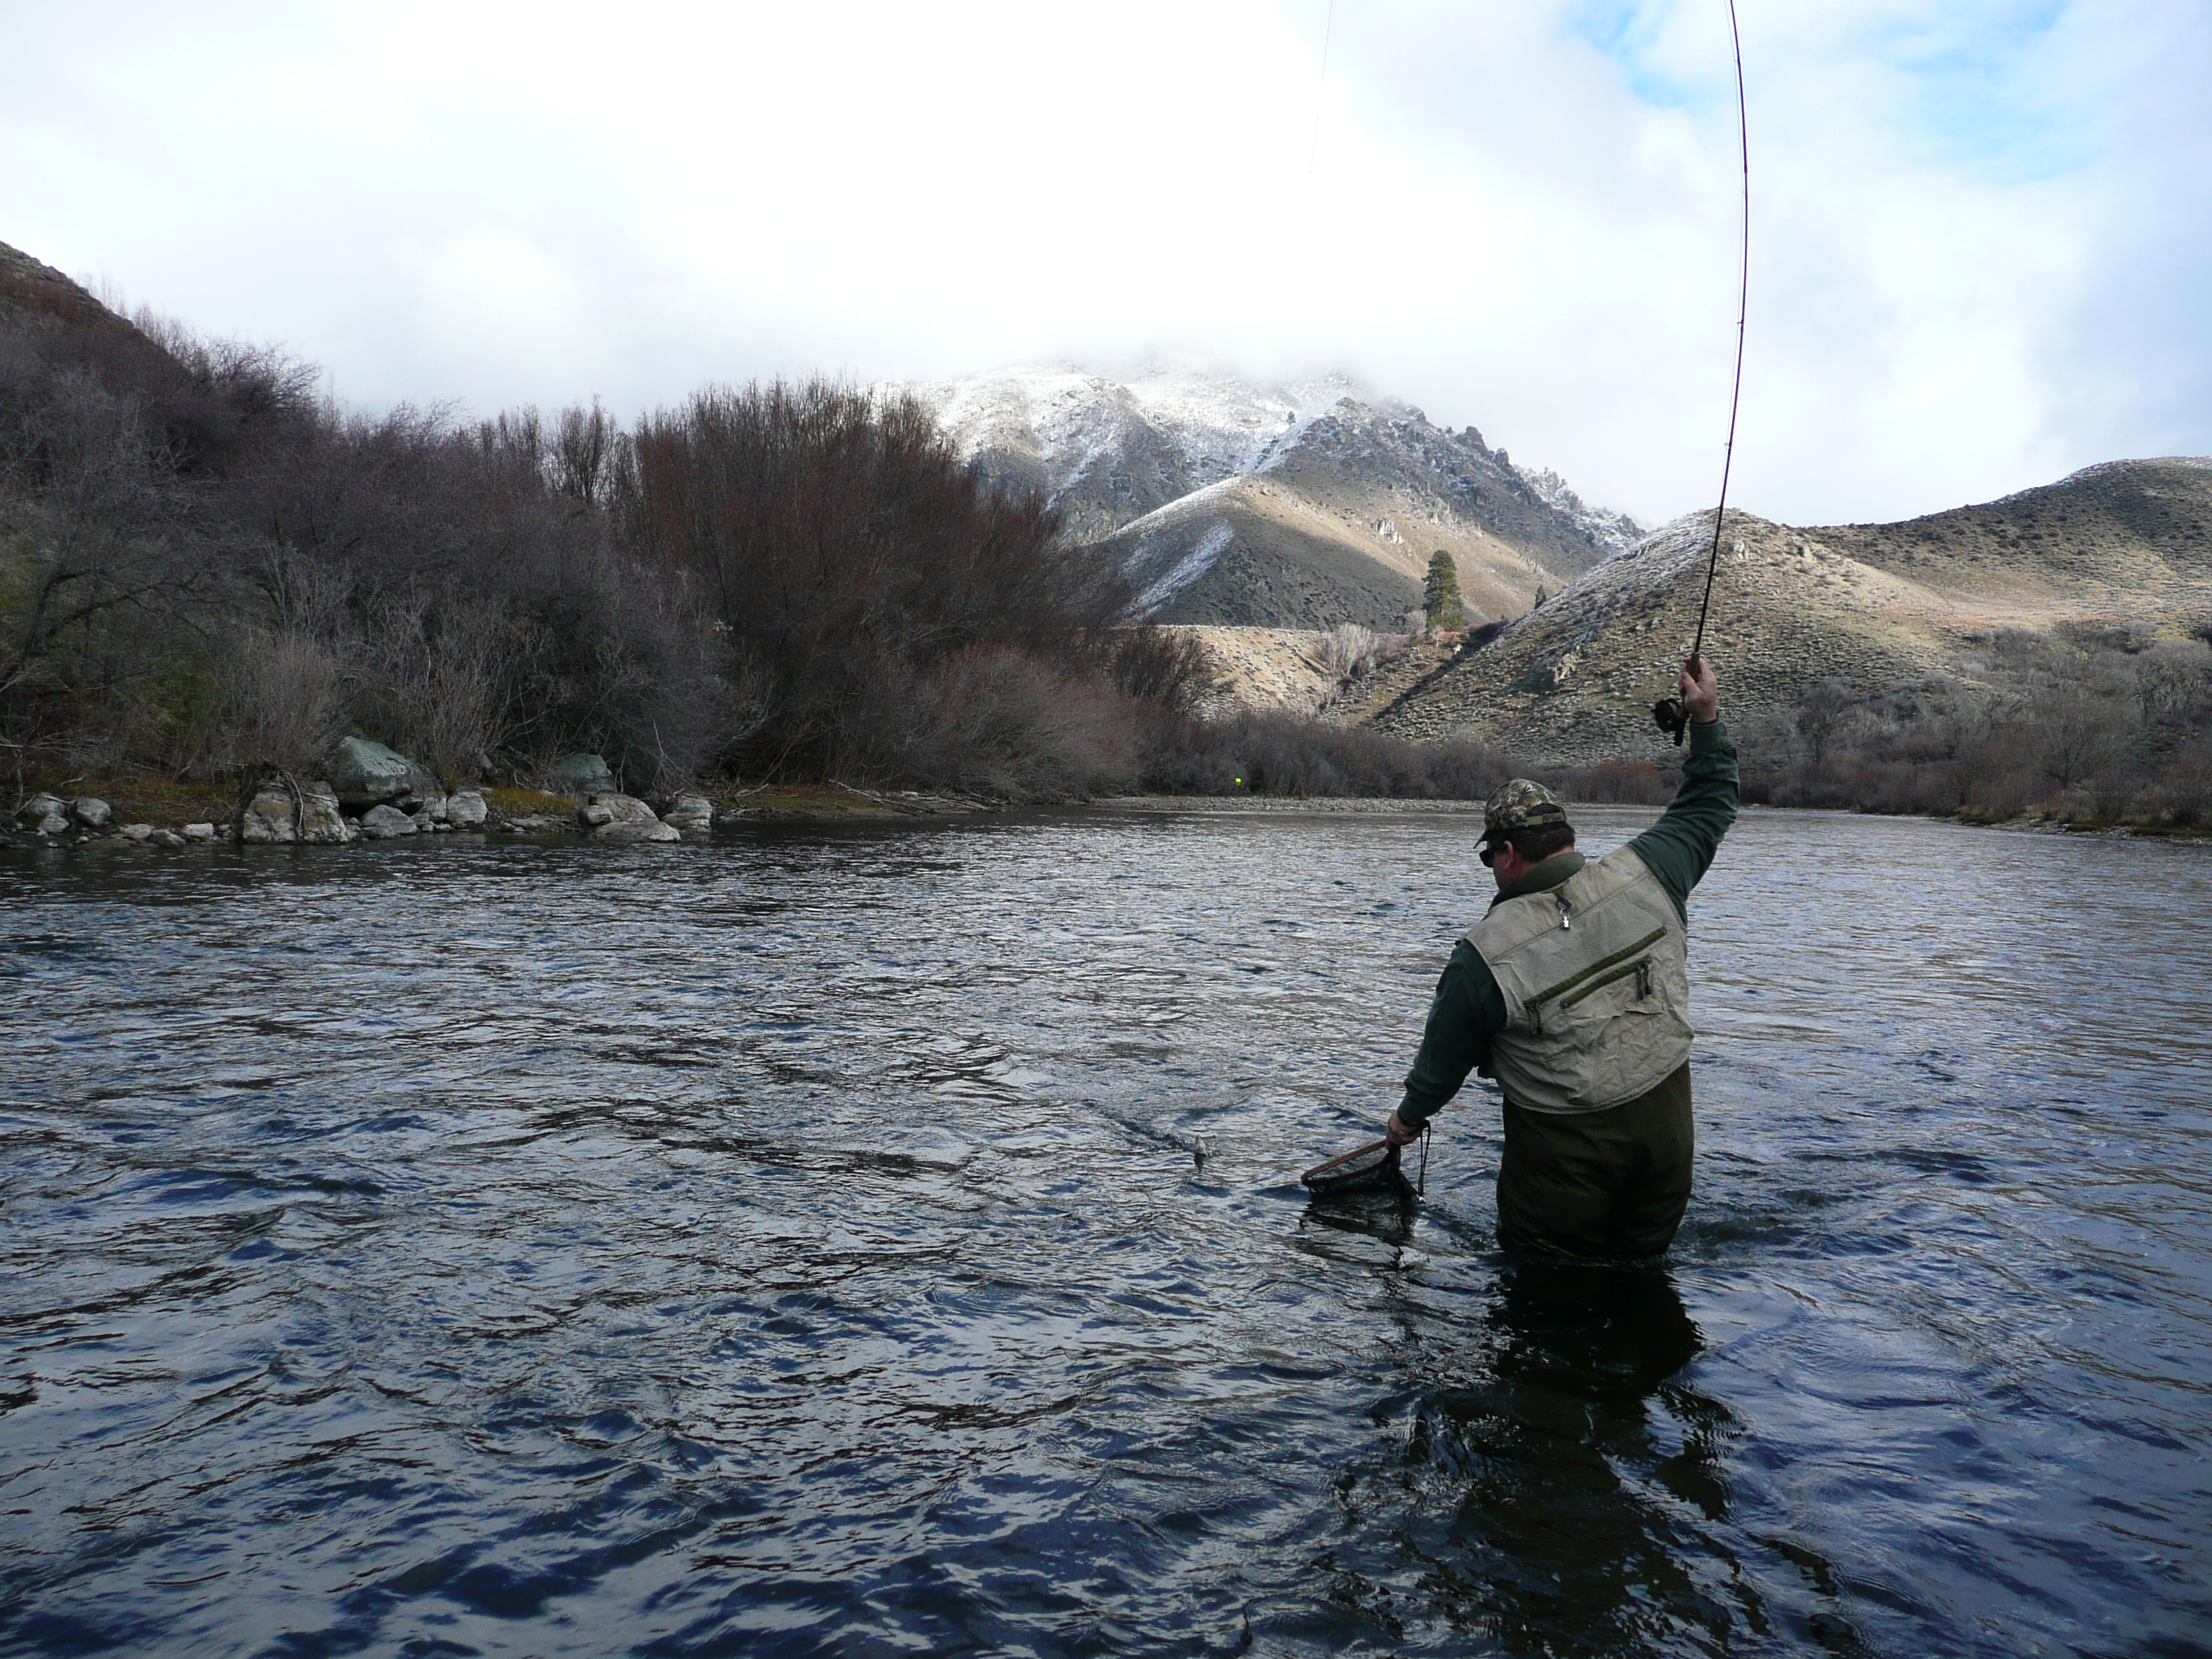 Late fall and winter can be productive for stream fishing